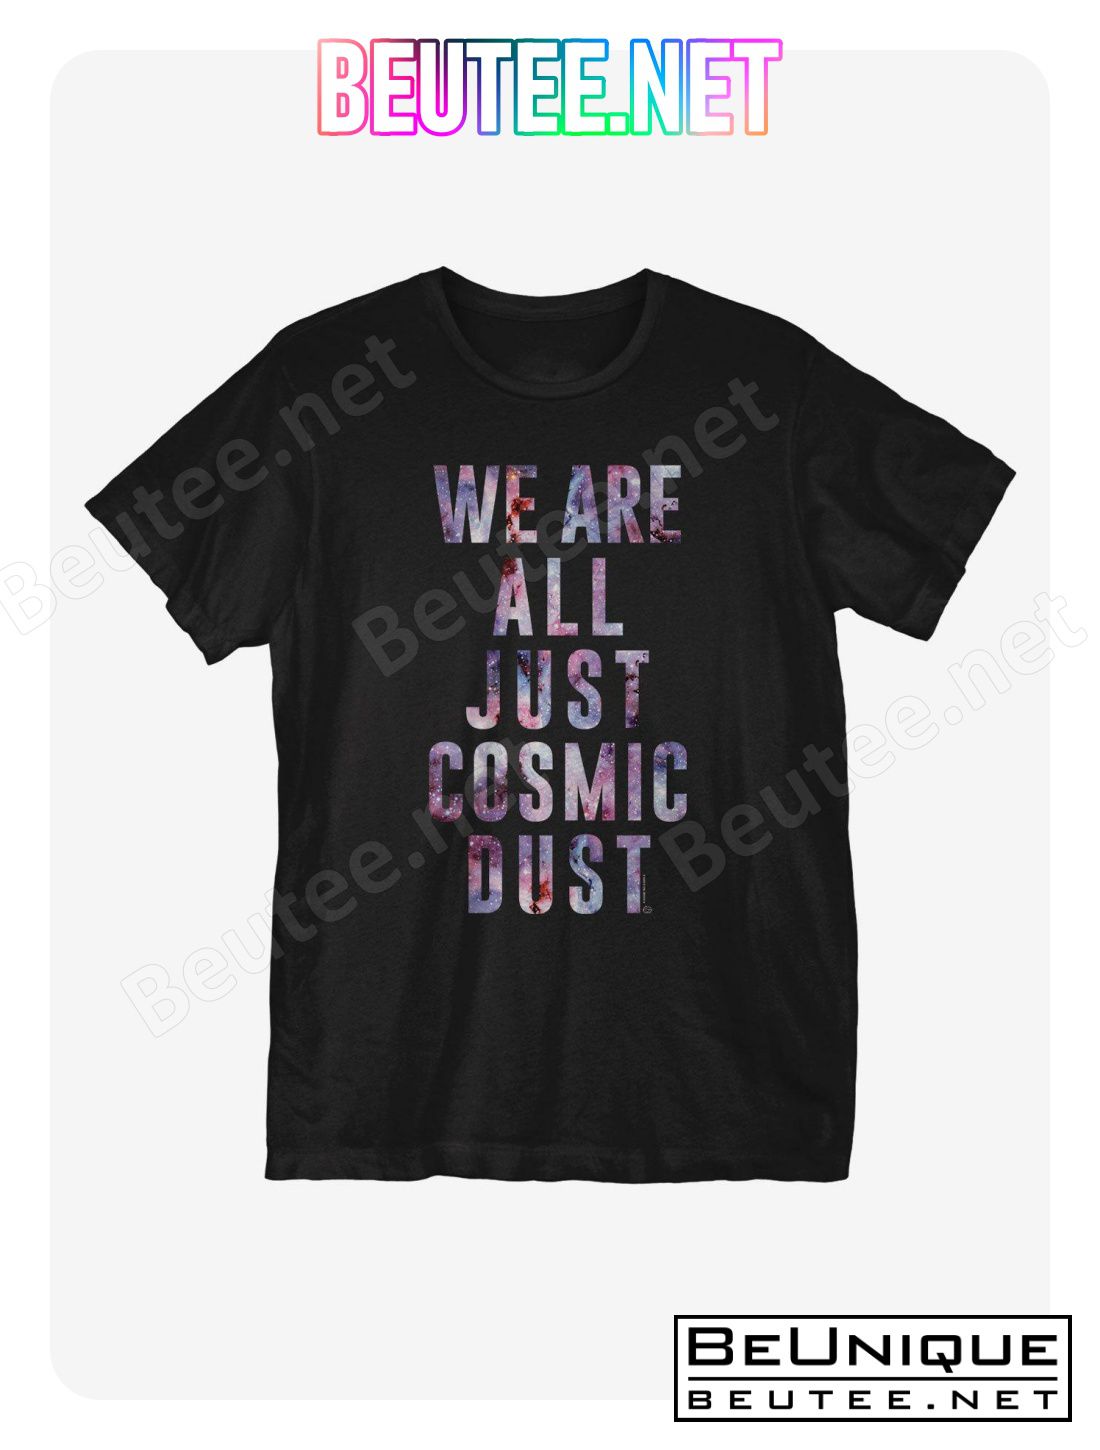 We Are Just Cosmic Dust T-Shirt